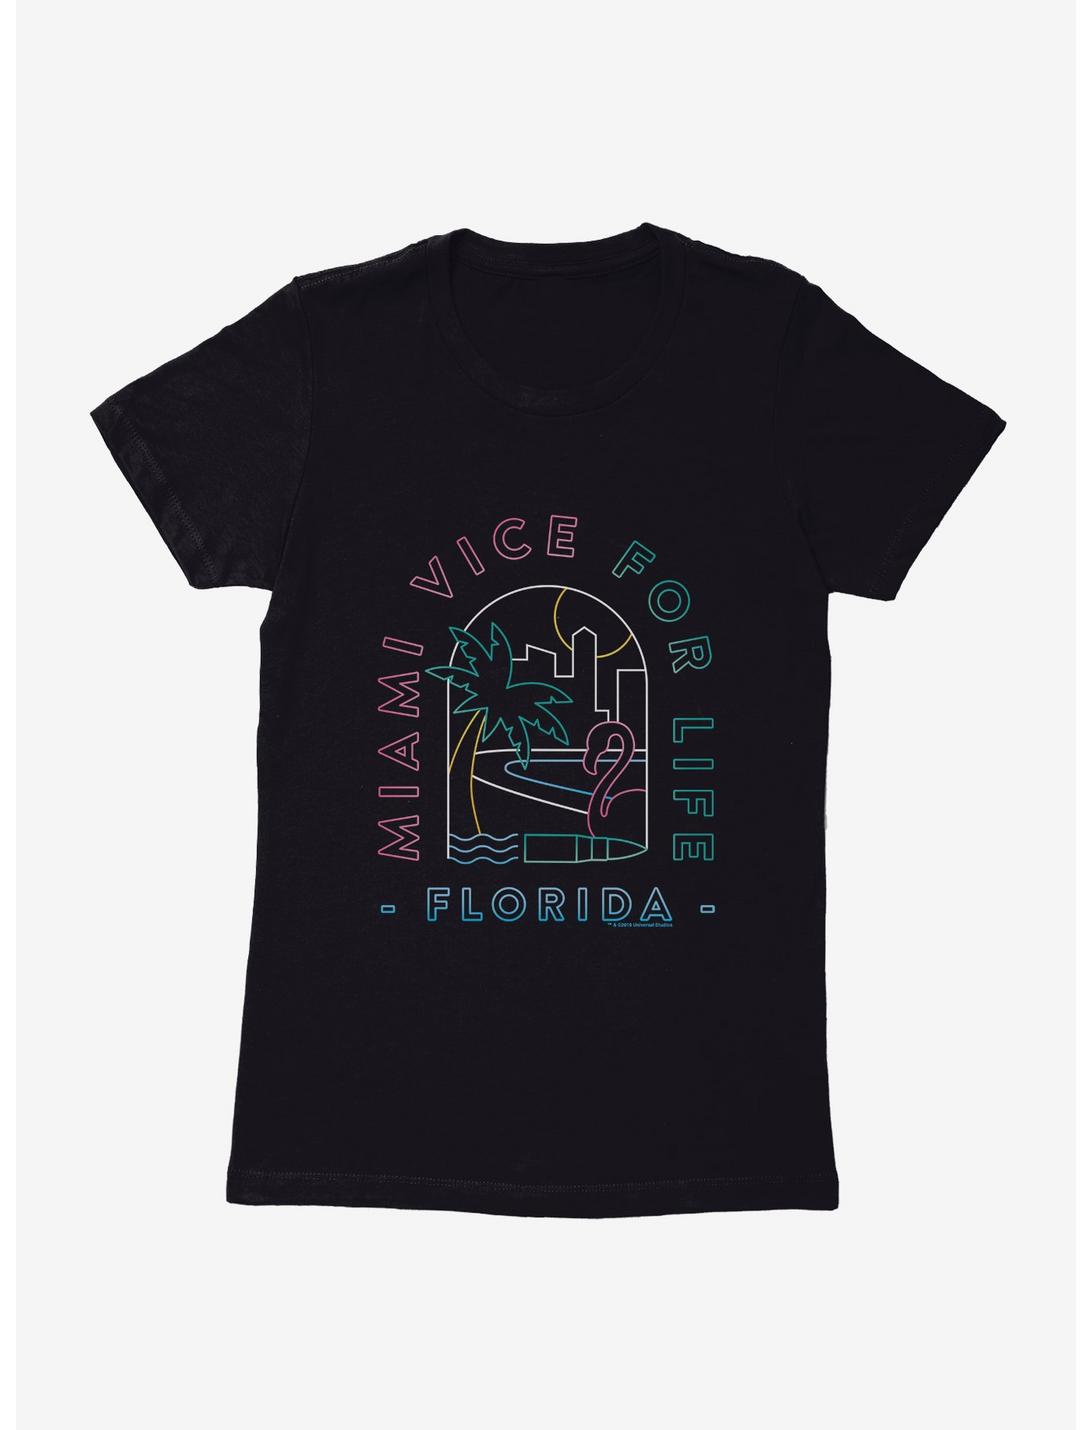 Miami Vice For Life Beach Scene Outline Womens T-Shirt, BLACK, hi-res